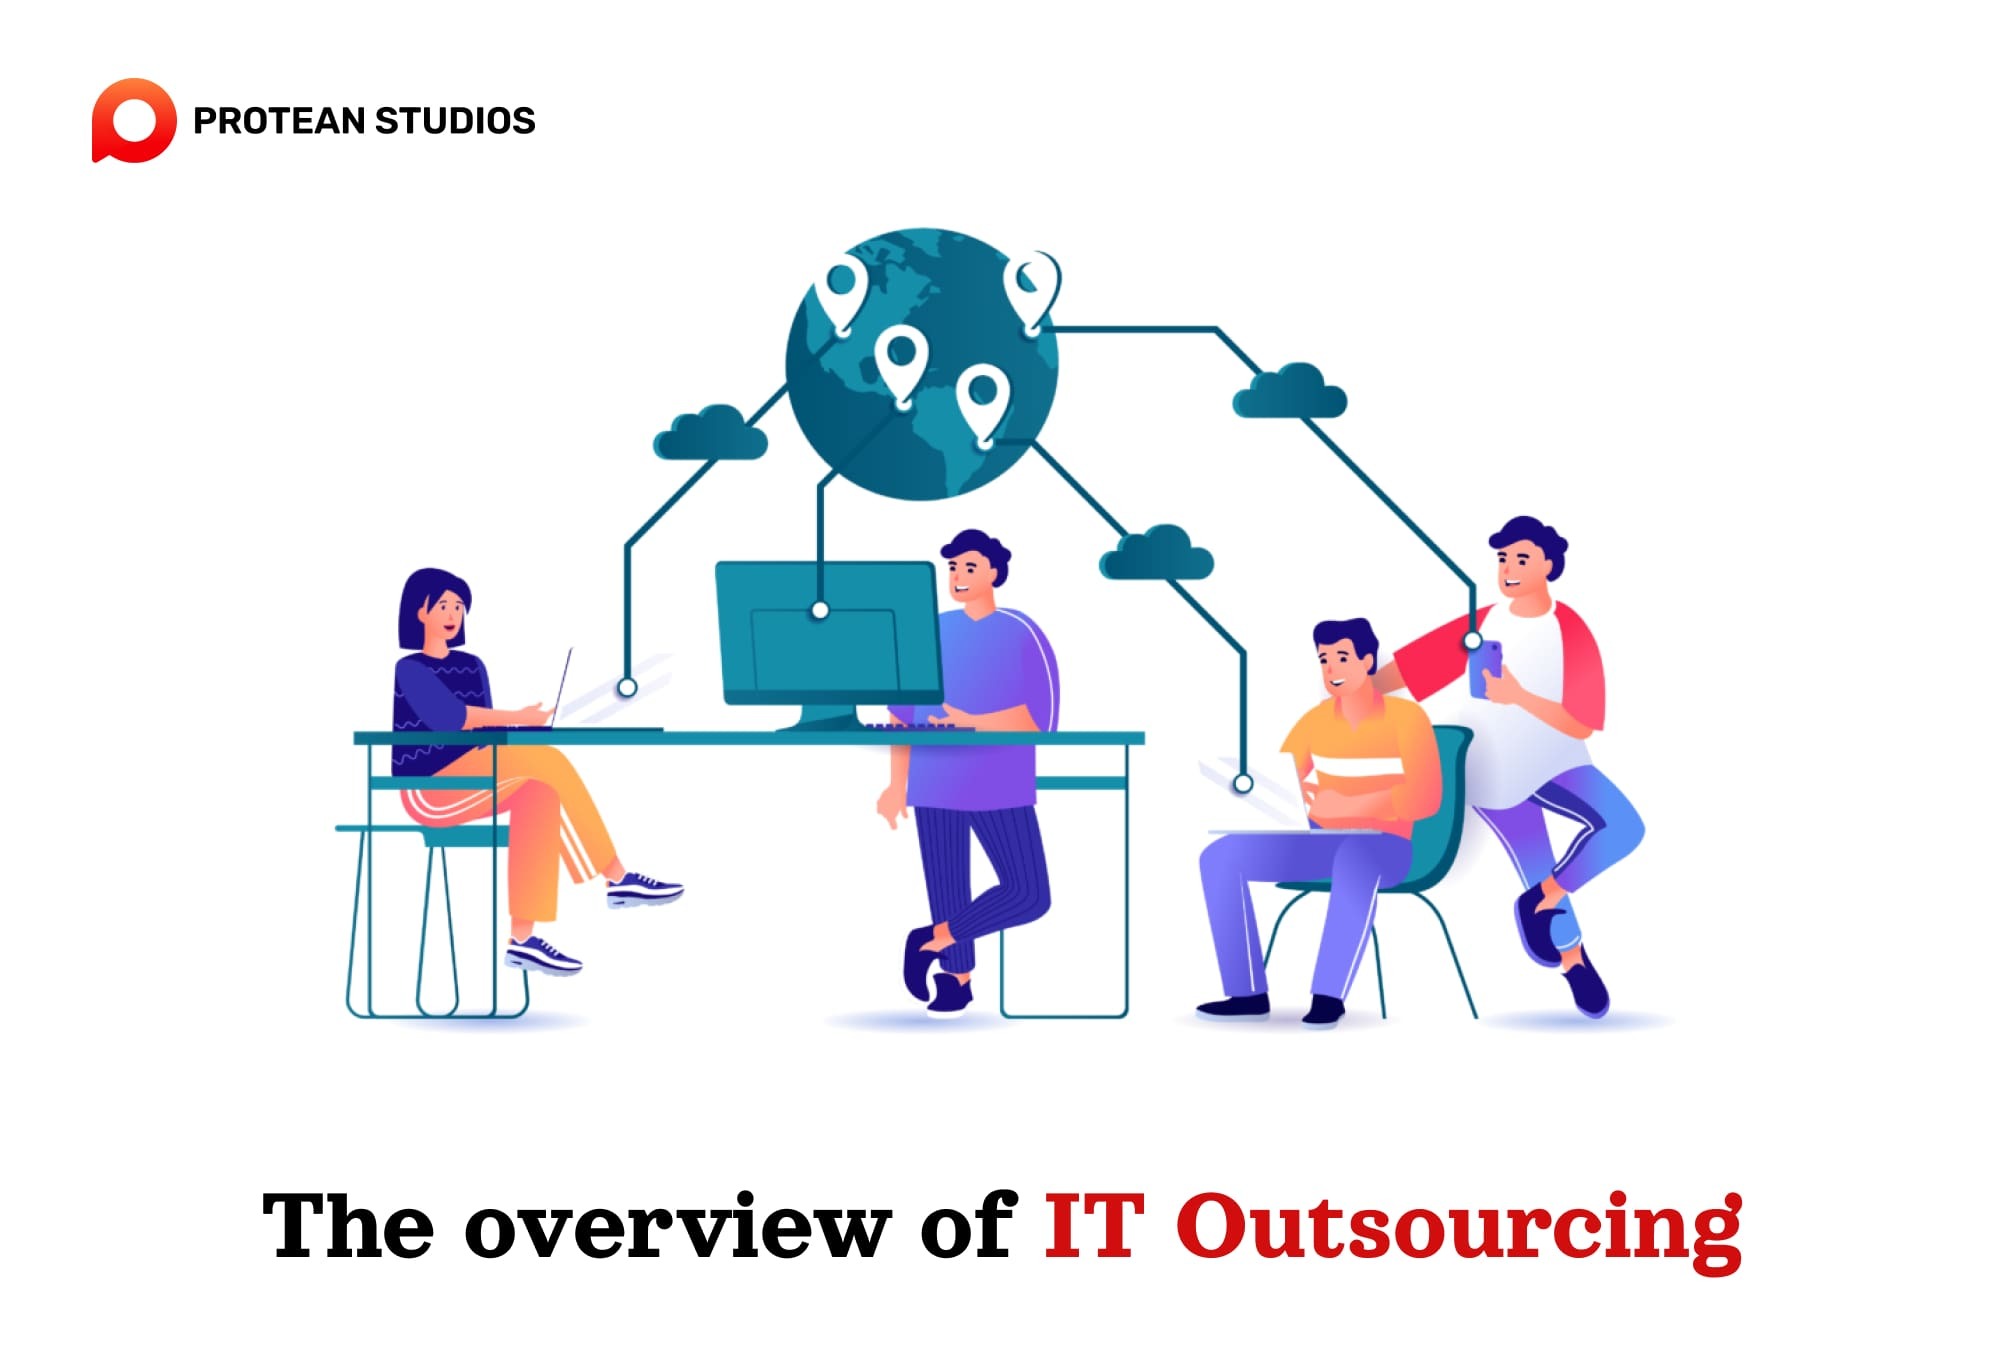 Some basic features of the outsourcing field